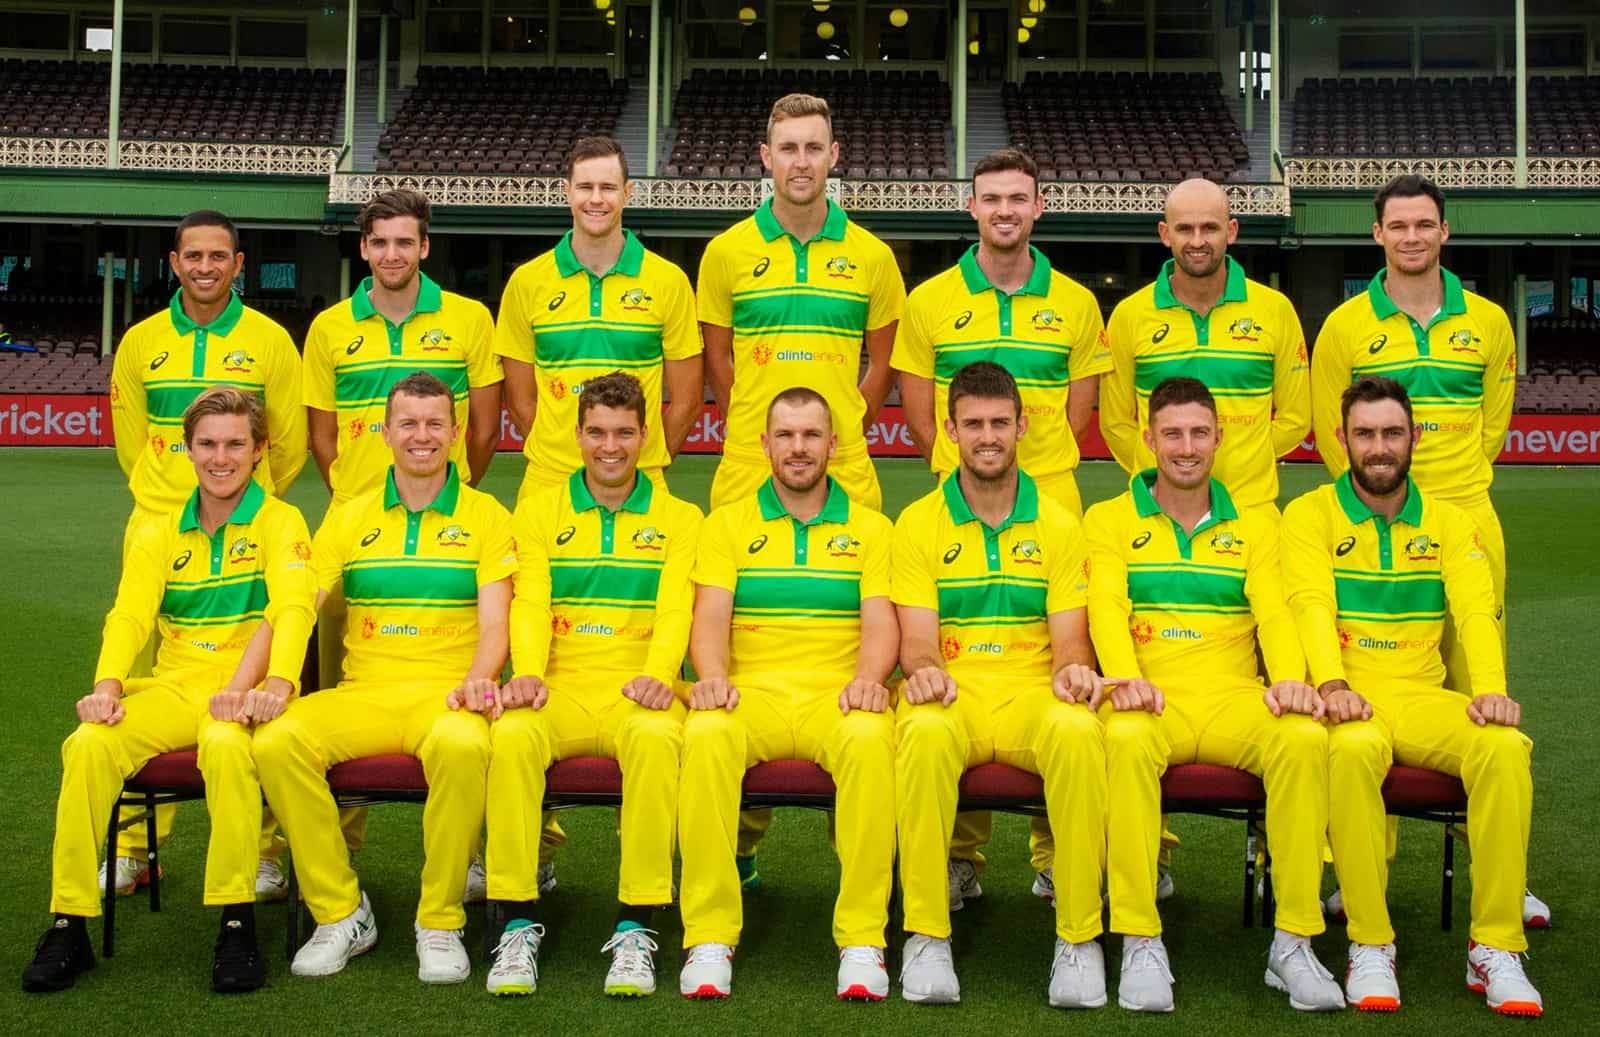 Cricket World Cup 2019: Australia's new jersey for ICC World Cup